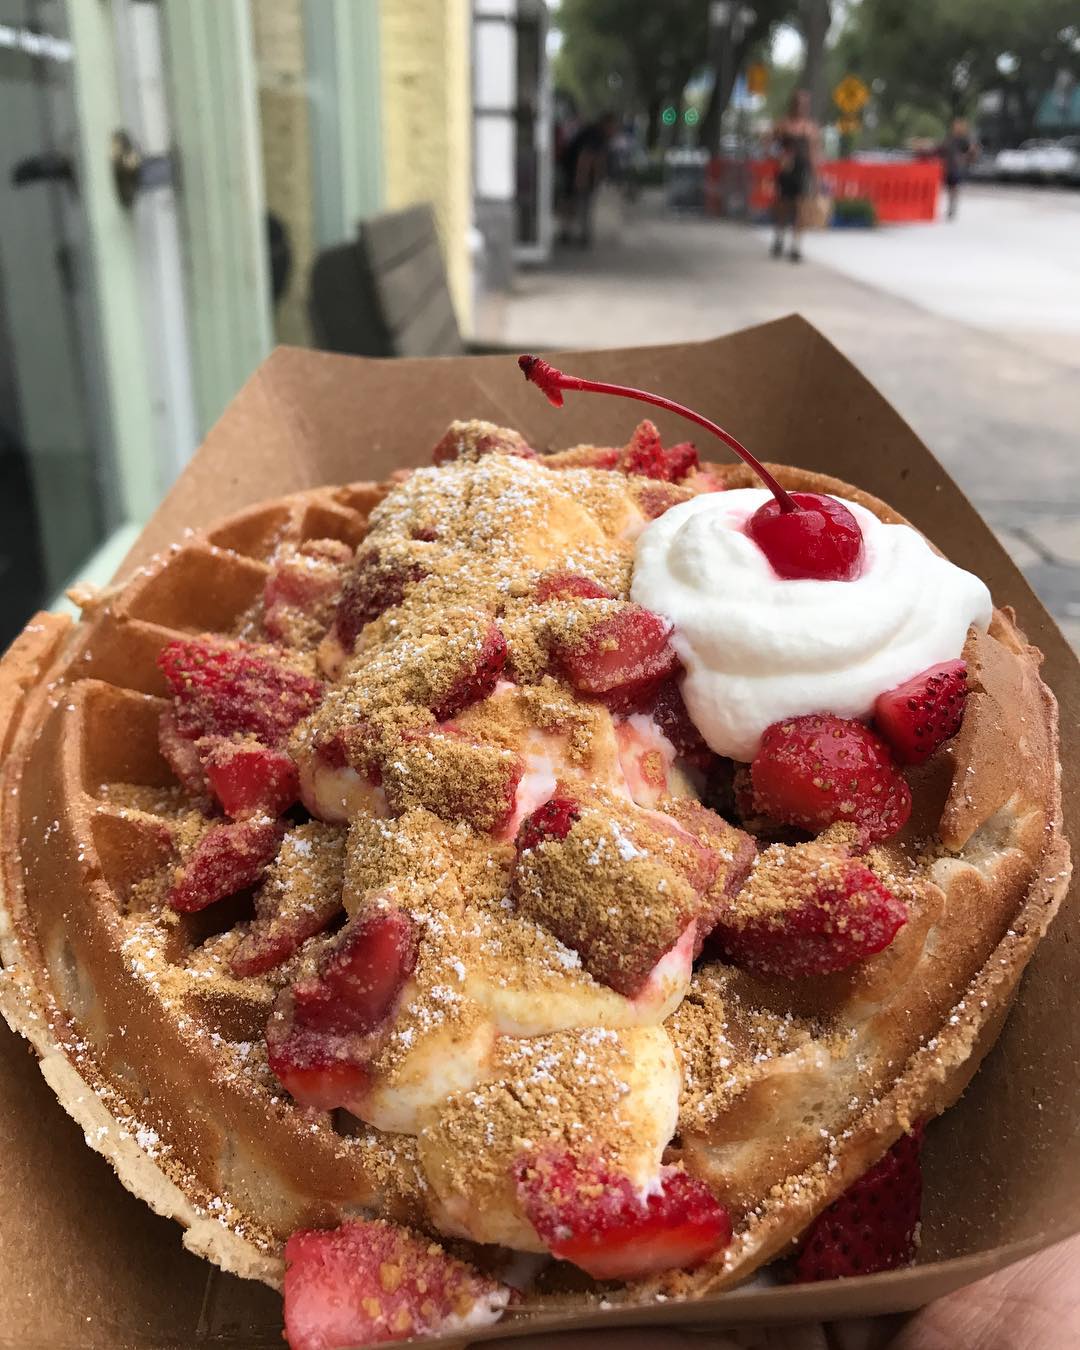 Belgian Waffle Covered in Strawberries and Cream. Photo by Instagram user @foodlife_tampabay